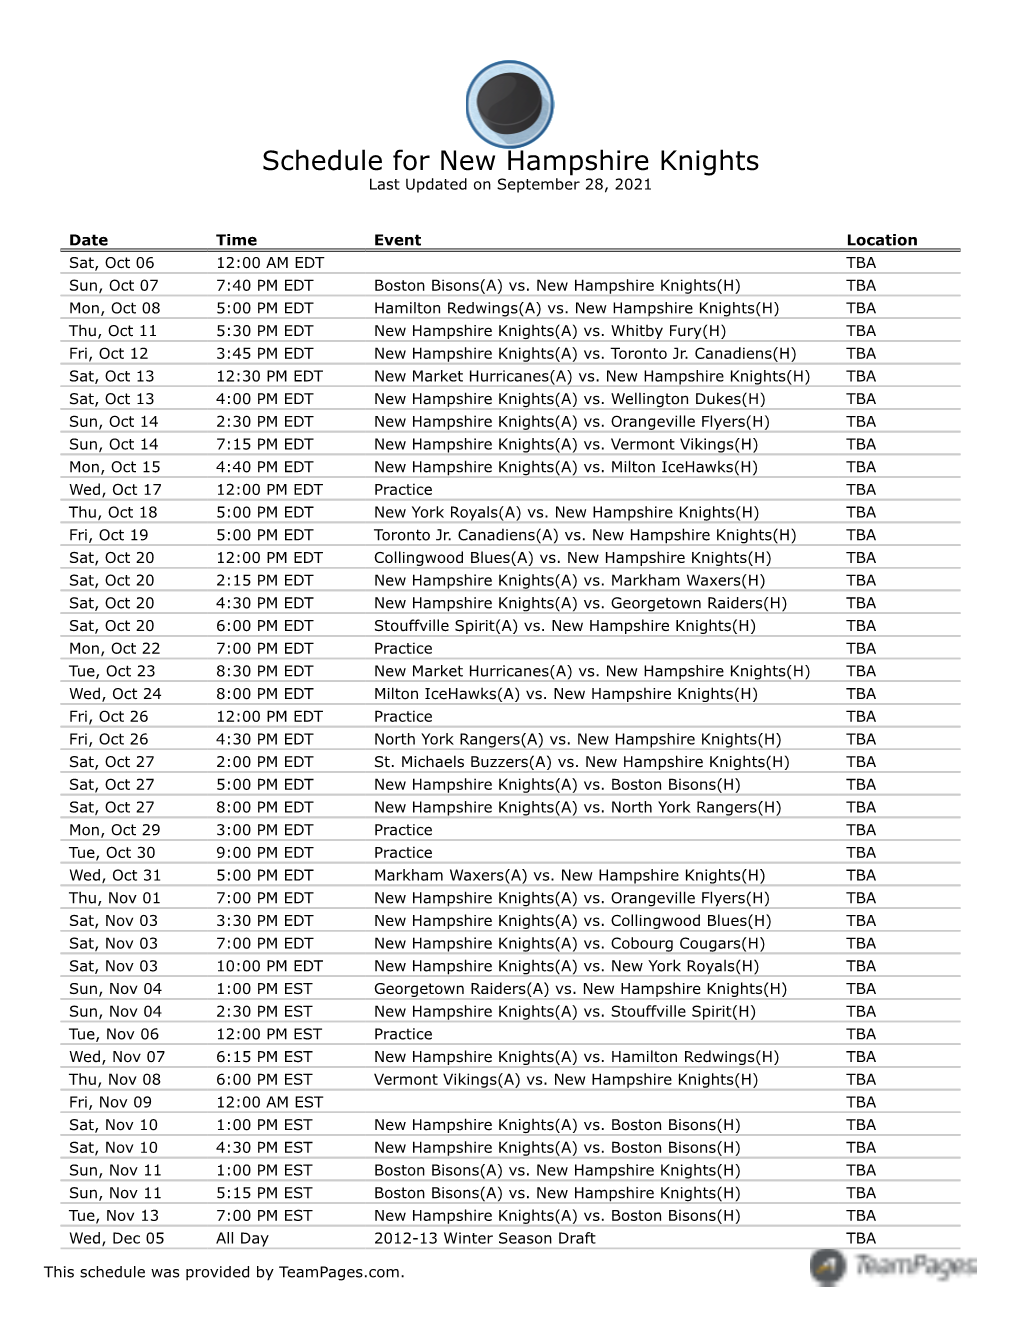 Schedule for New Hampshire Knights Last Updated on September 28, 2021